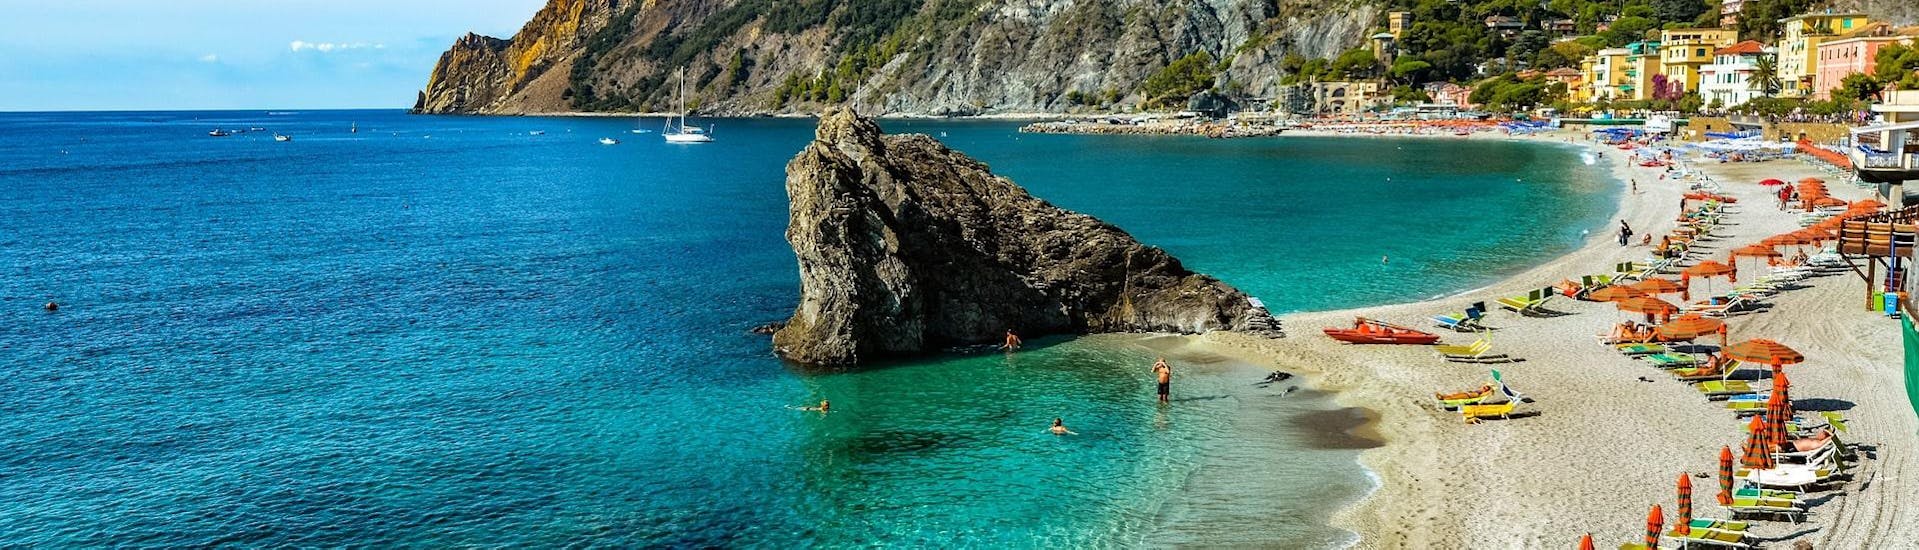 The crystal clear water of Monterosso that you can admire during the boat trip to Riomaggiore and Monterosso with sightseeing with Cinque Terre Ferries.